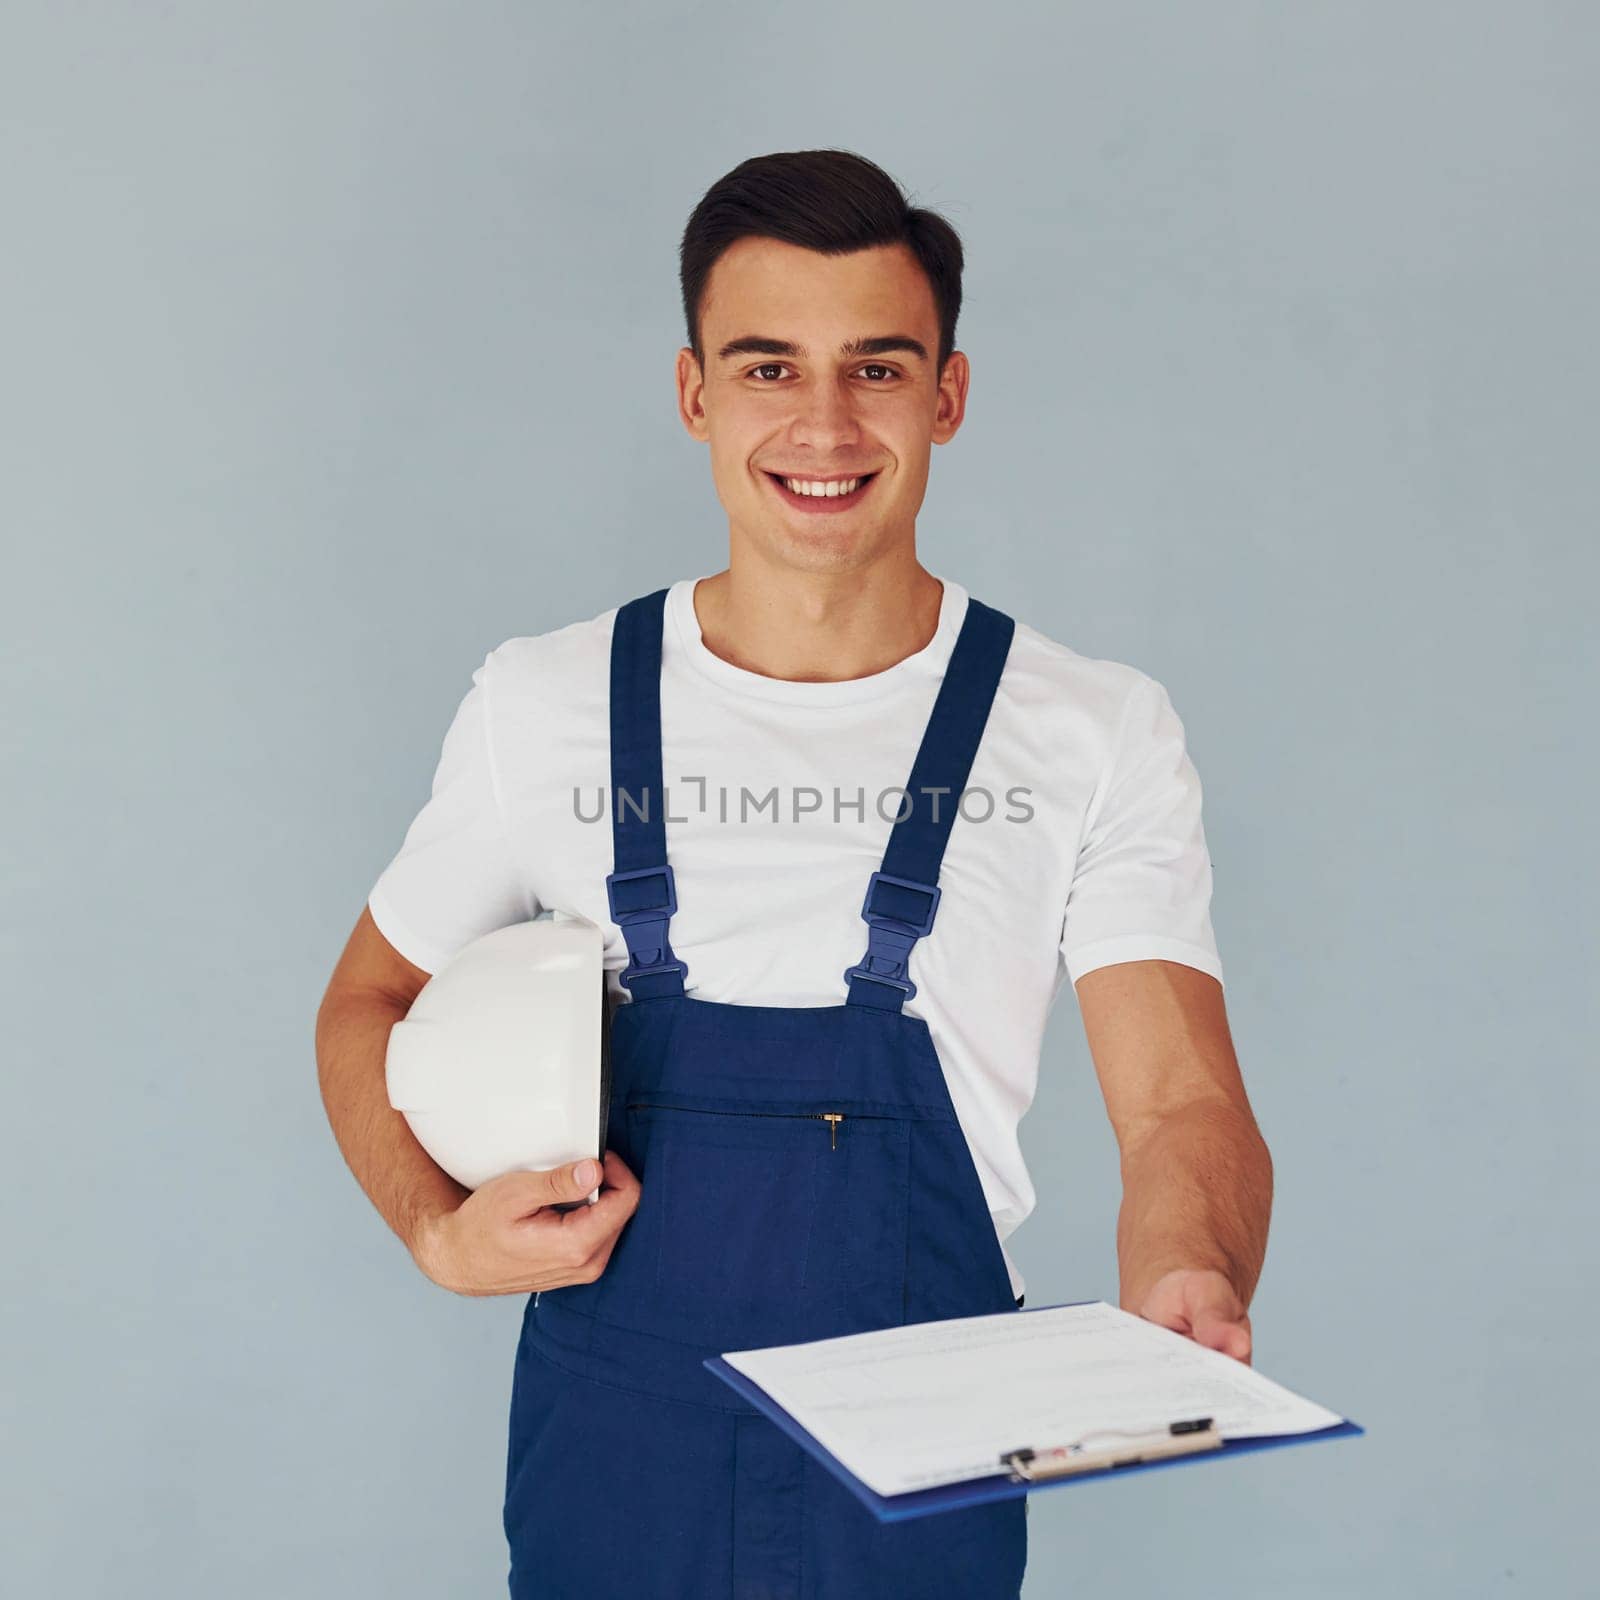 With notepad and hard hat. Male worker in blue uniform standing inside of studio against white background.